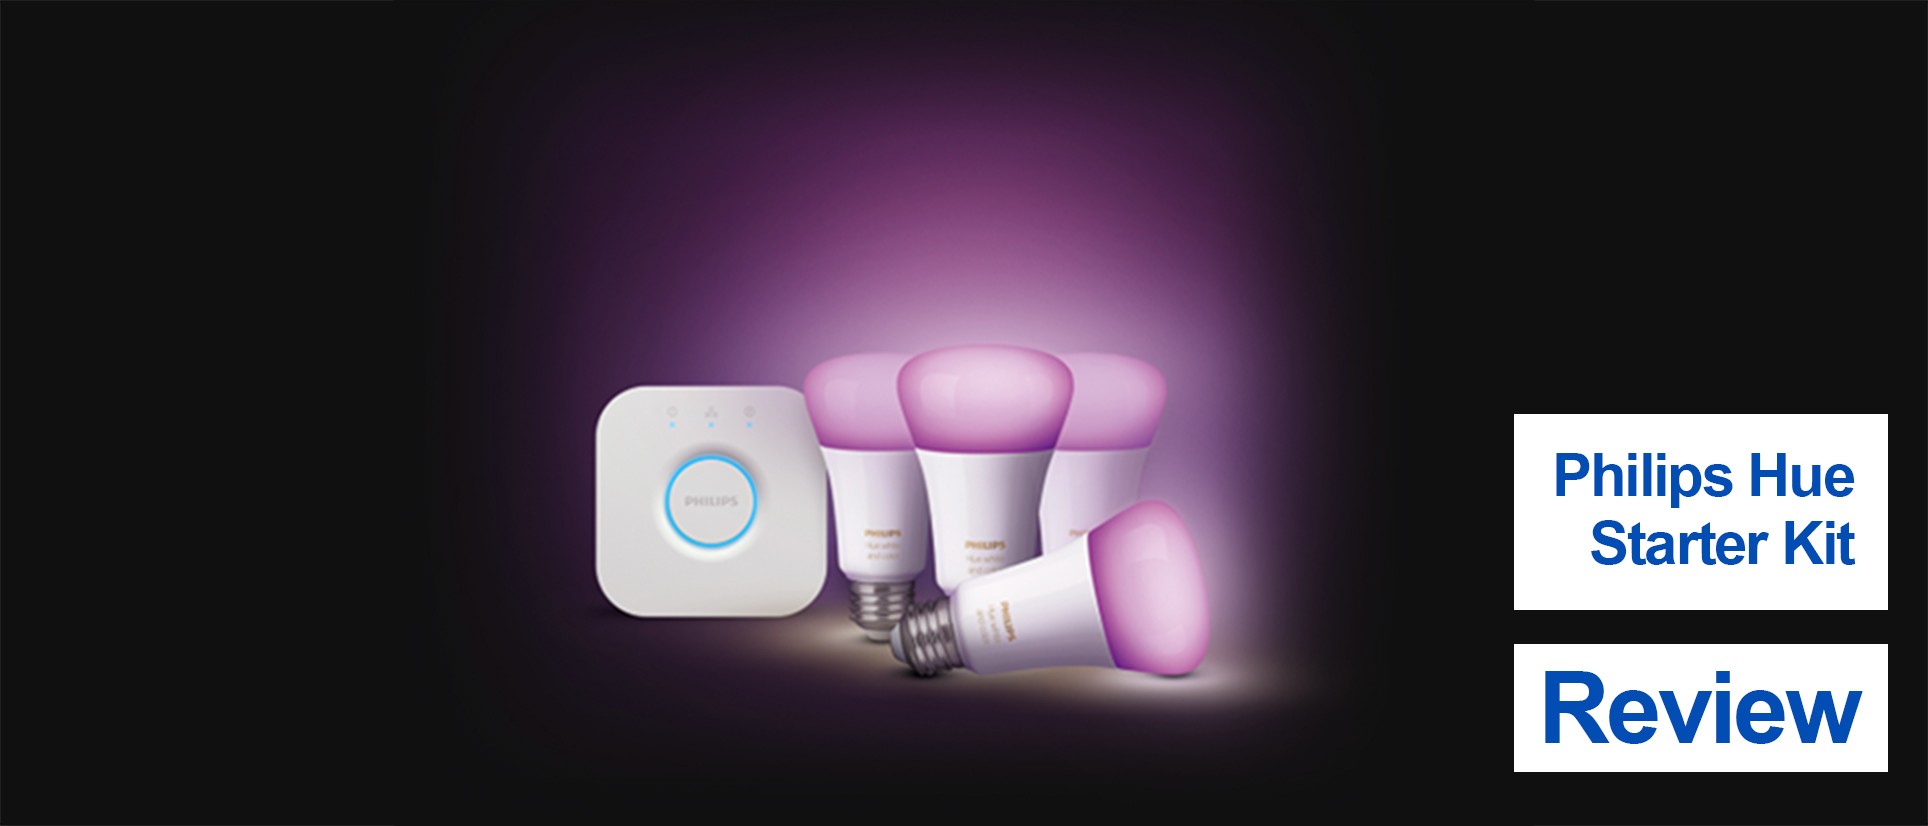 Philips Hue Starter Kit Review 2021 | Best Buys